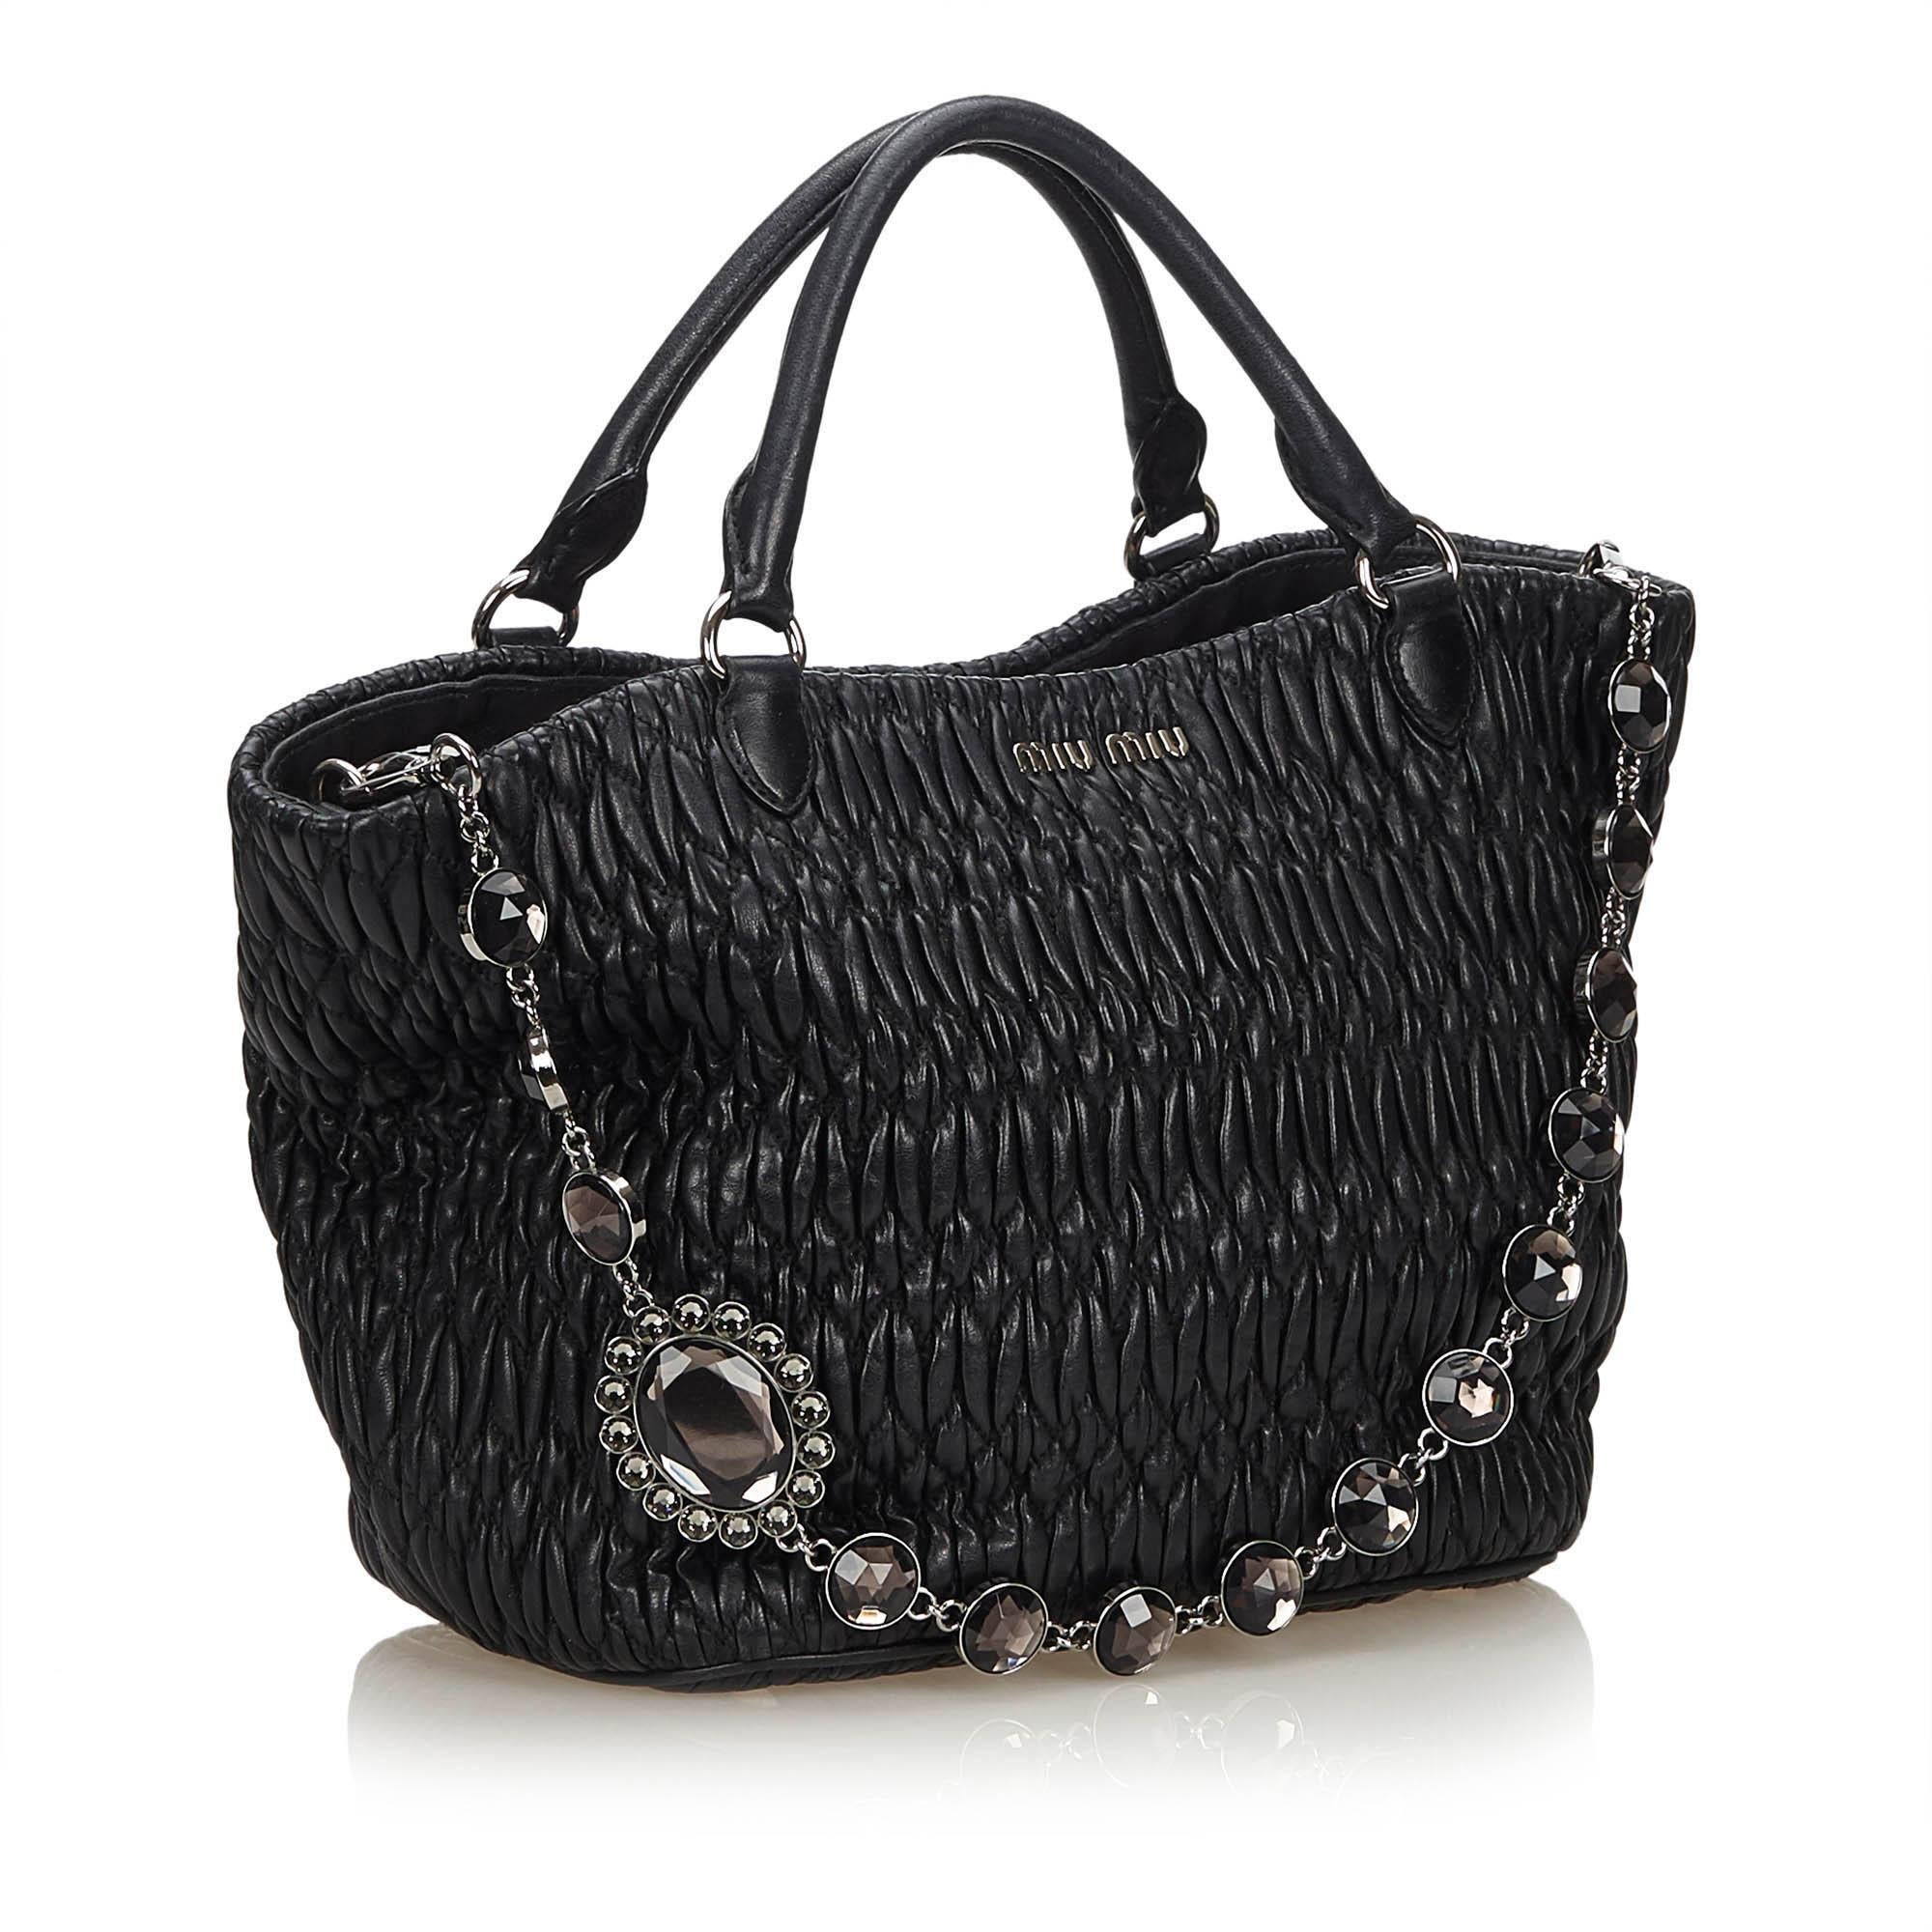 This bag features a gathered leather body, rolled leather handles, crystal embellished chain strap, clasp closure, and interior zip and slip pocket. It carries as AB condition rating.

Inclusions: 
This item does not come with